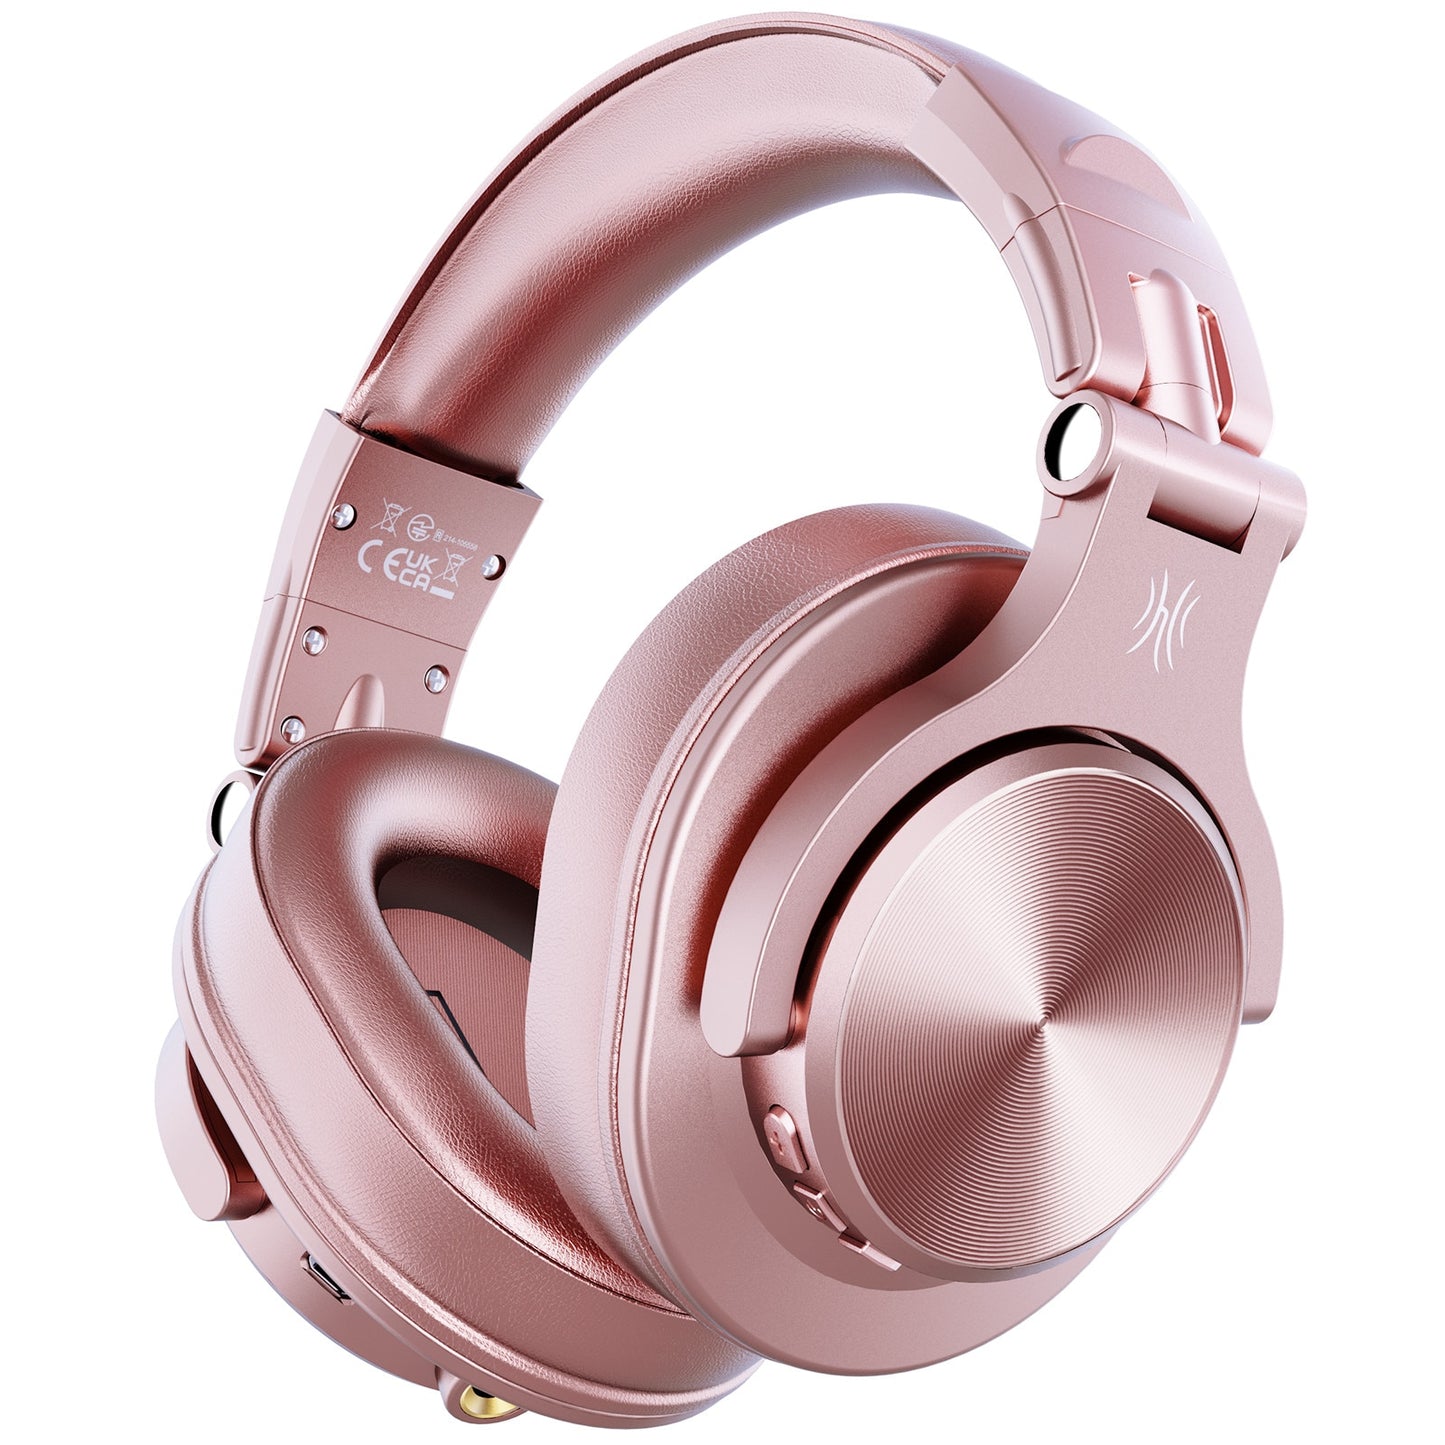 Oneodio A70 Fusion Wireless Headphones